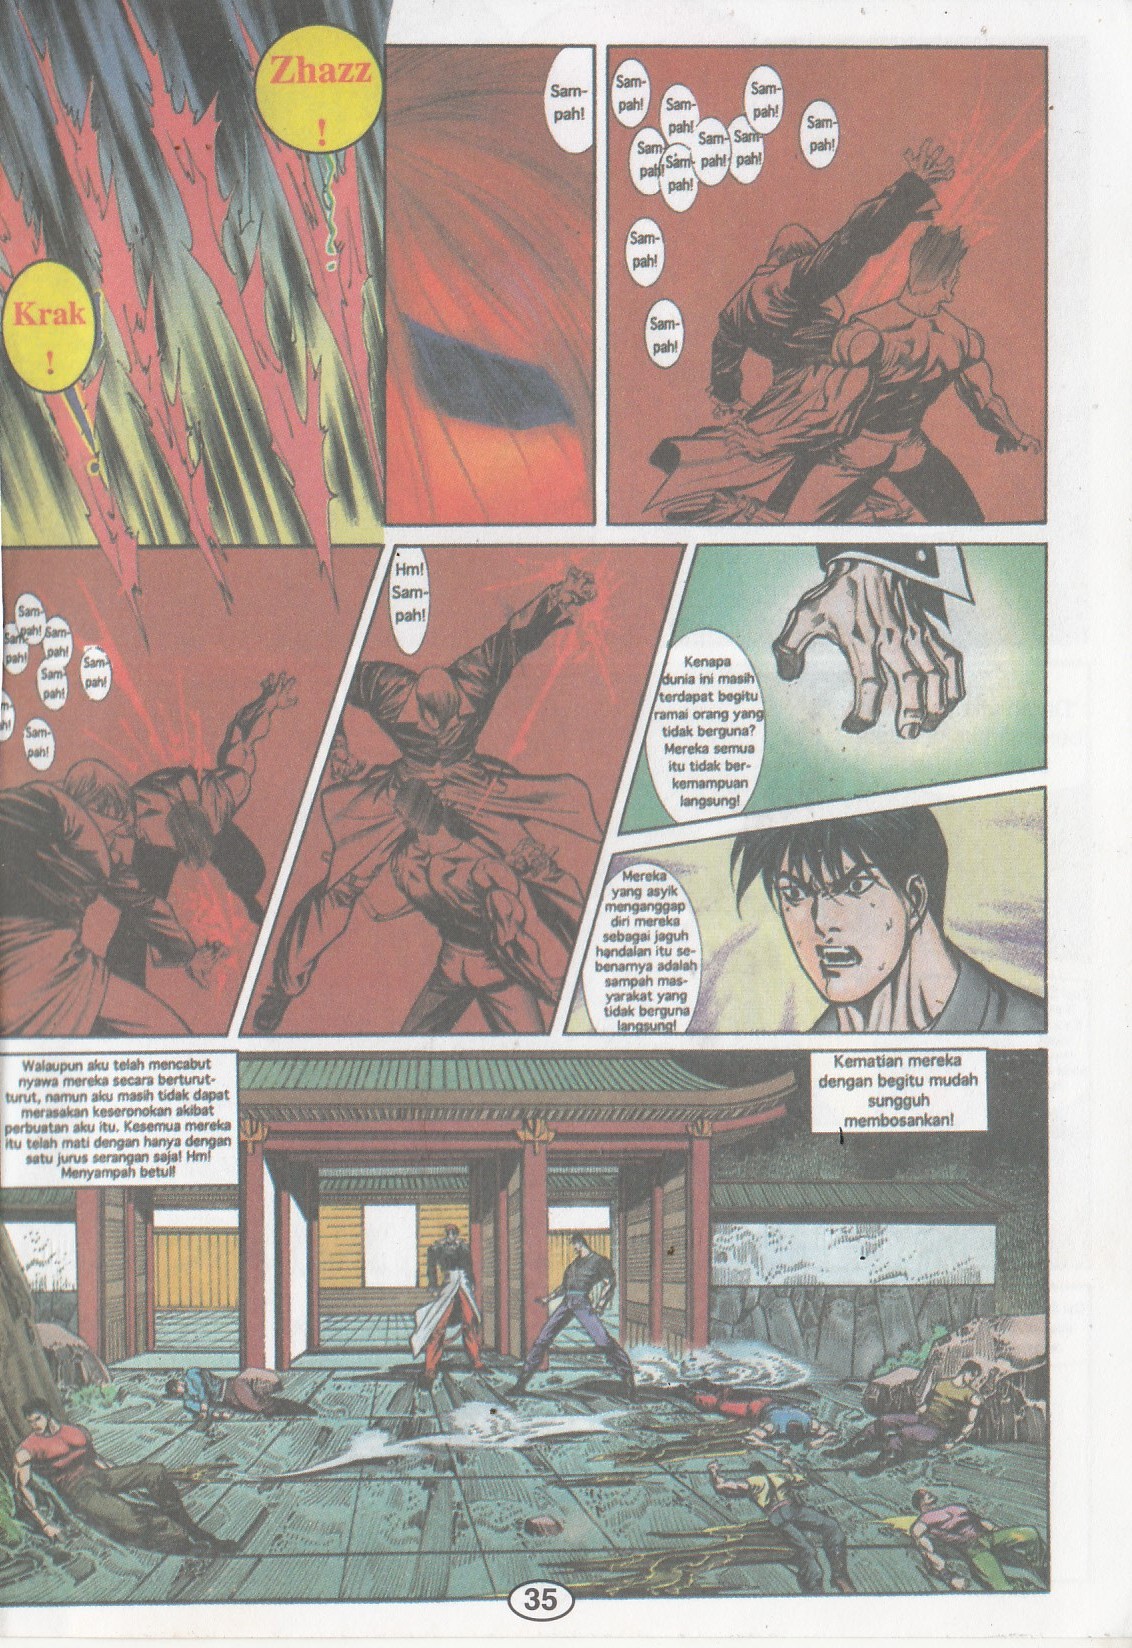 The King Of Fighters : Wira Naga Sakti: Chapter 002 - Page 1